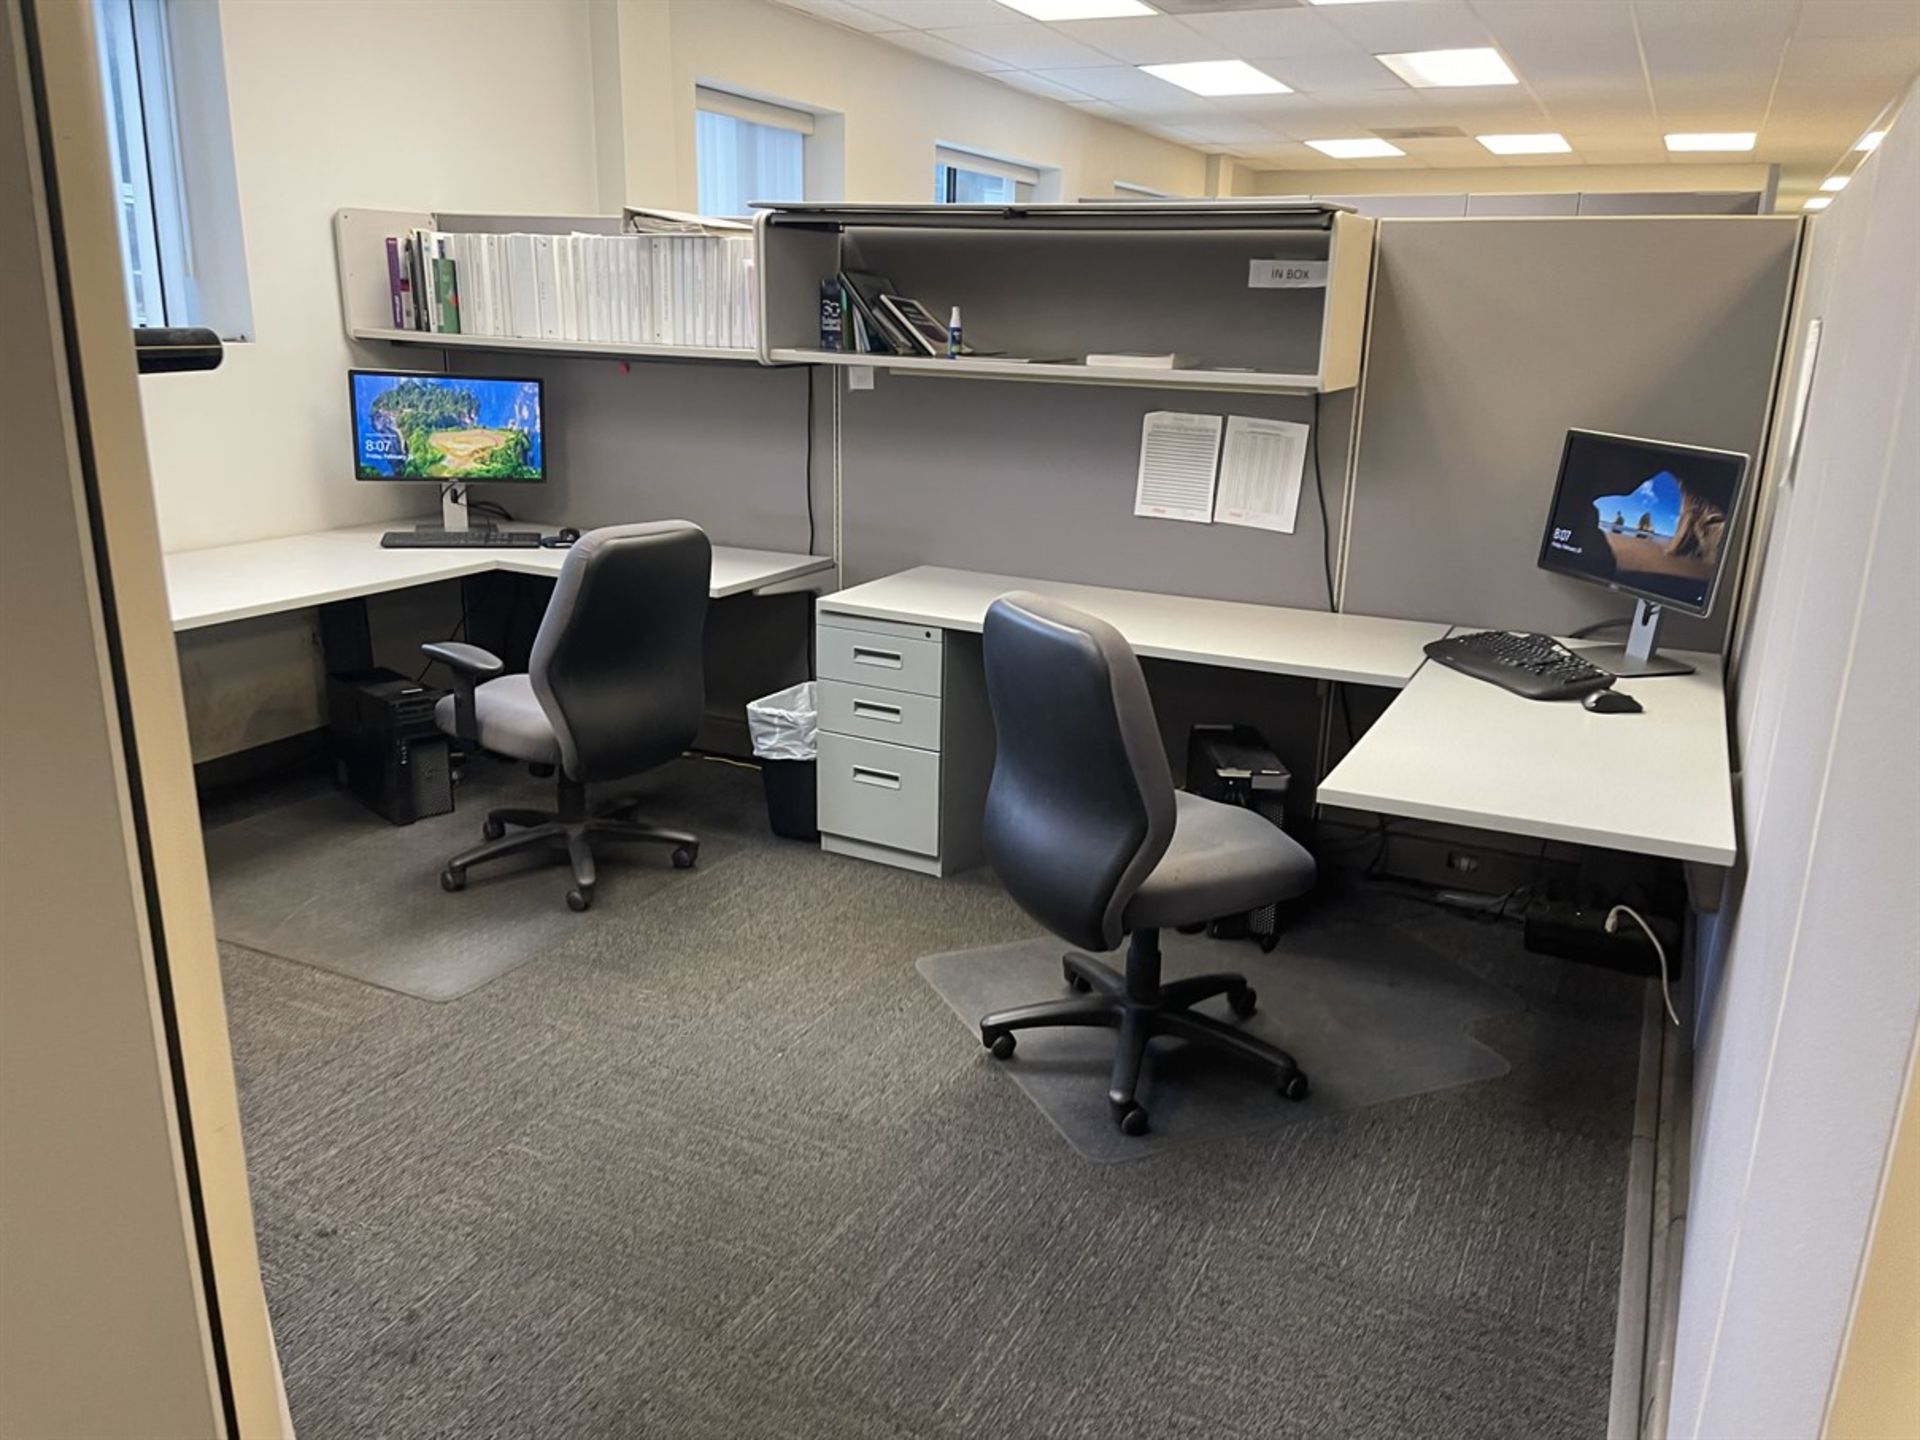 Office Area Comprising Large Cubicle Systems w/ Wall, Desks, and Chairs, (No Electronics or - Image 5 of 5